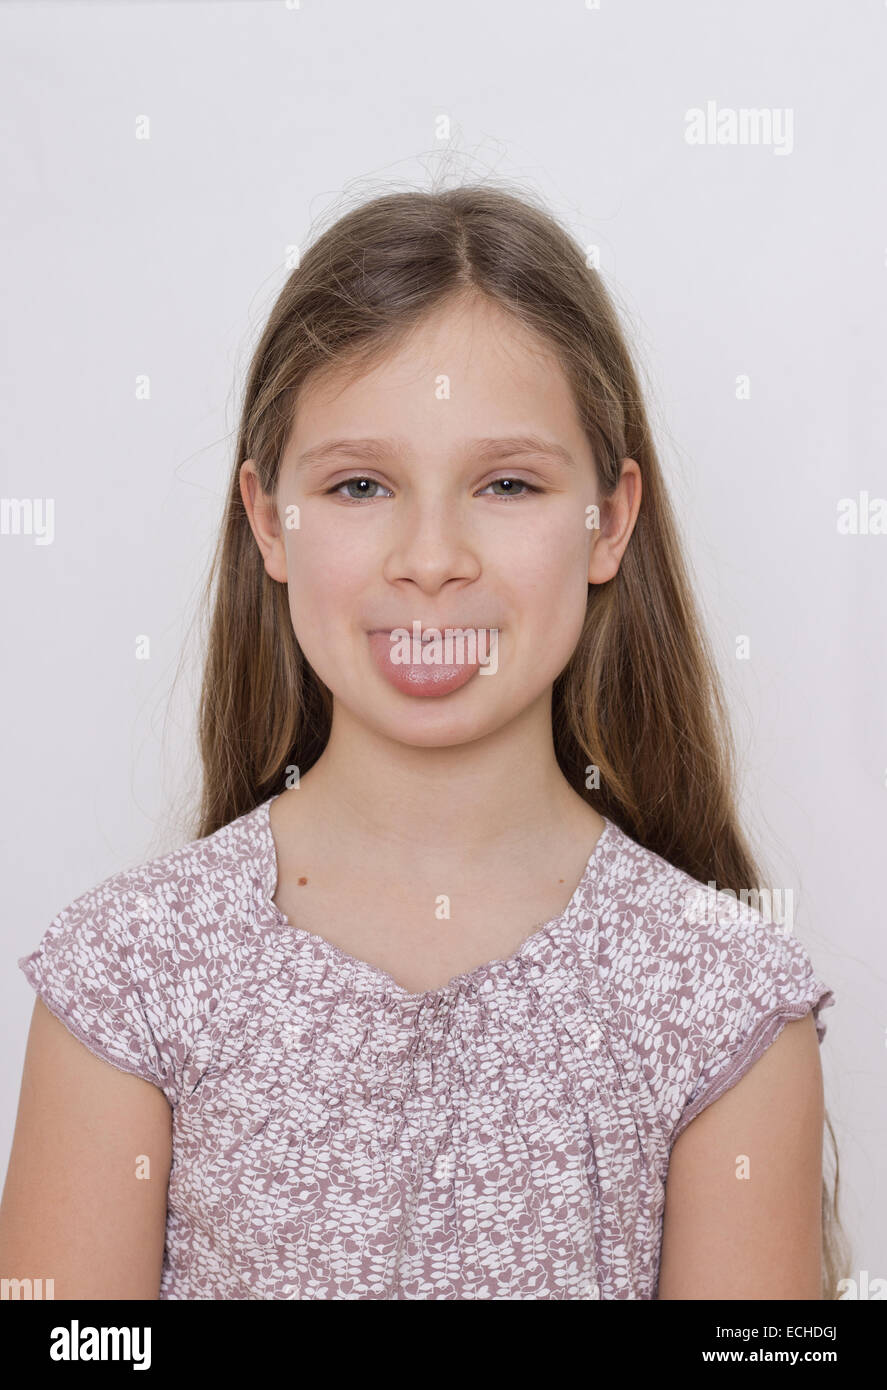 A girl showing her tongue Stock Photo